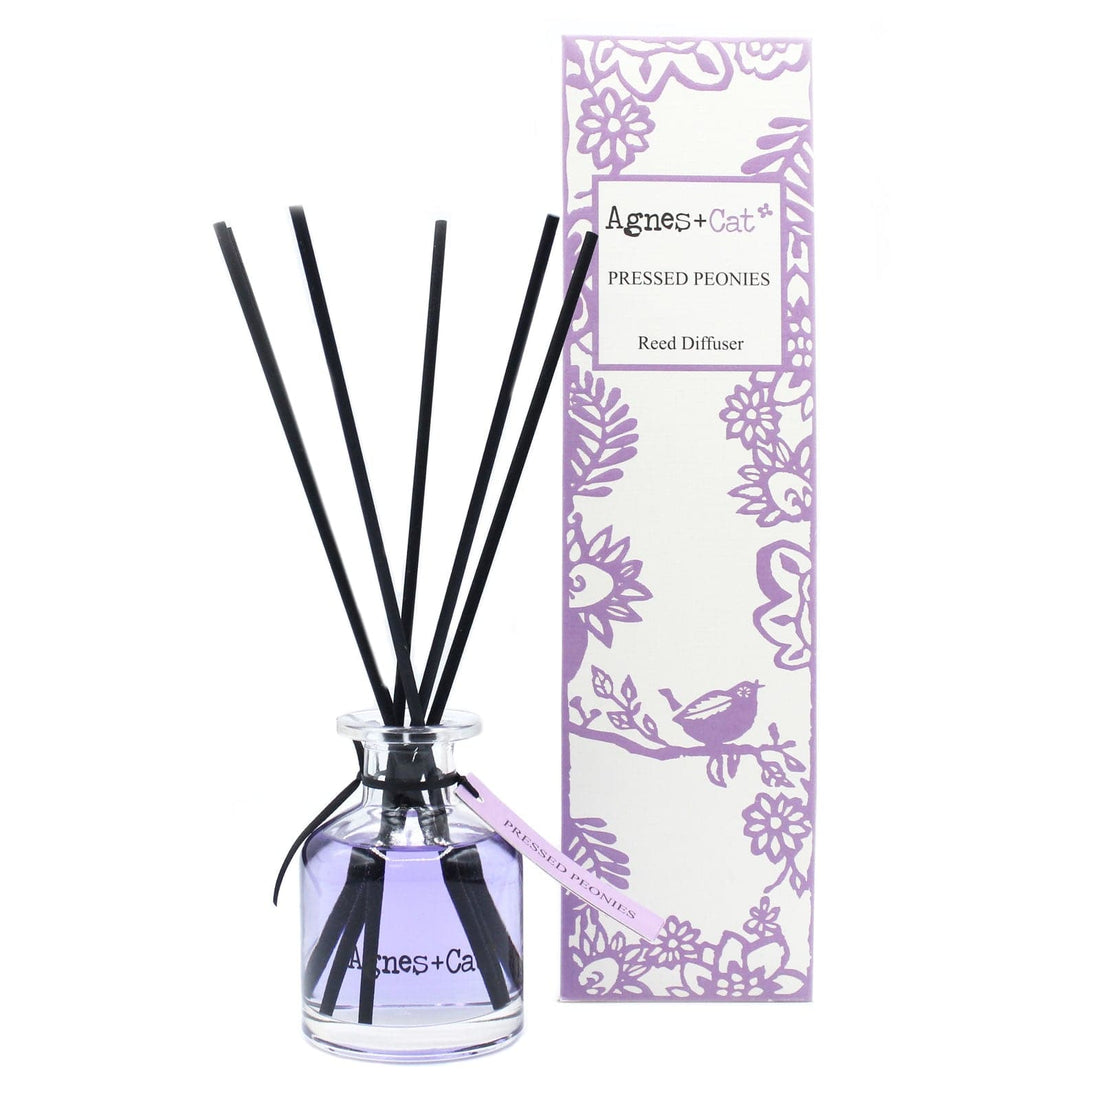 Box of 140ml Reed Diffuser - Pressed Peonie - best price from Maltashopper.com ACD-18DS